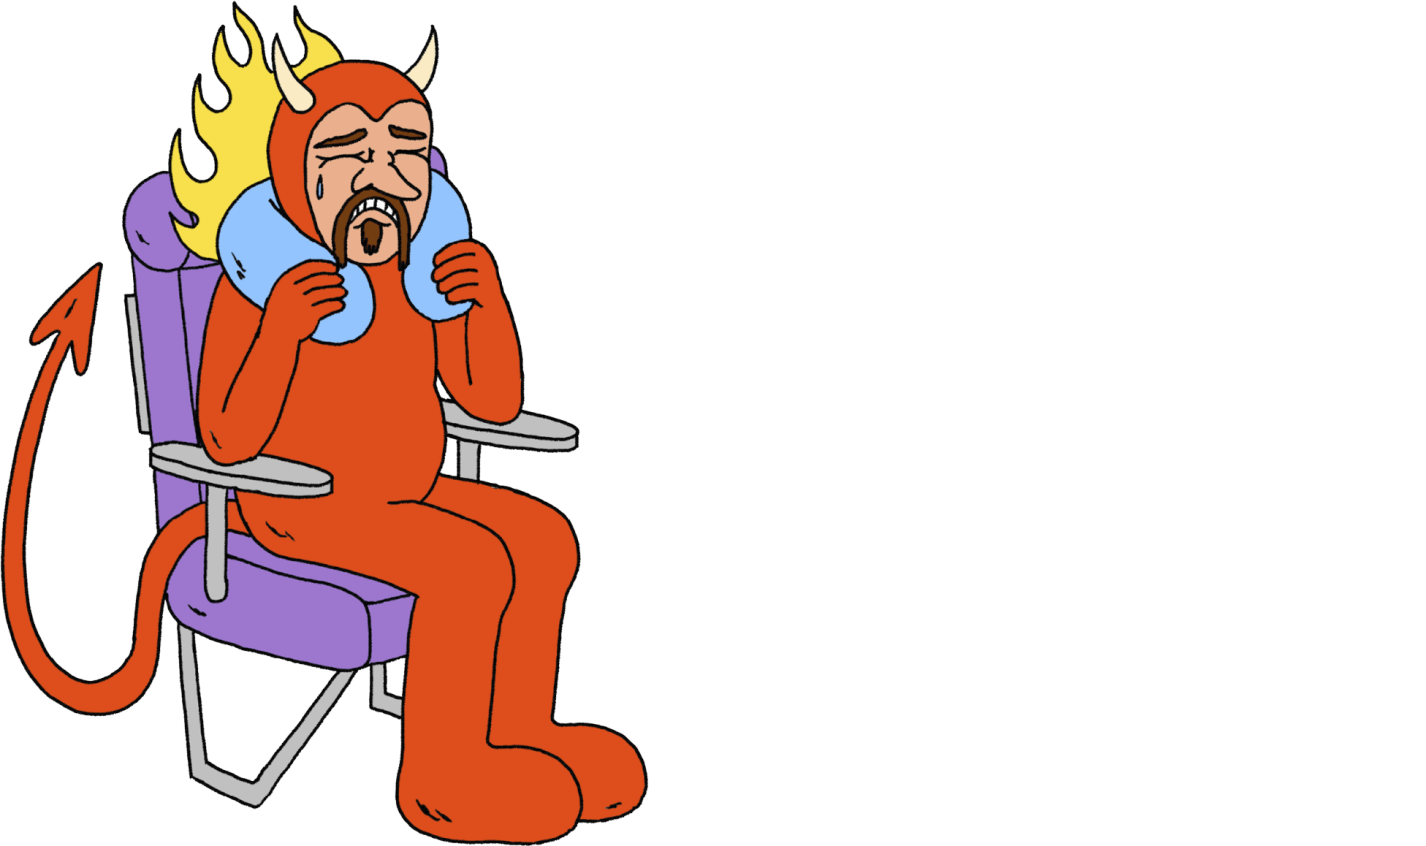 Humorous illustration of a devil in an airplane seat with a travel pillow around his flaming neck looking anguished